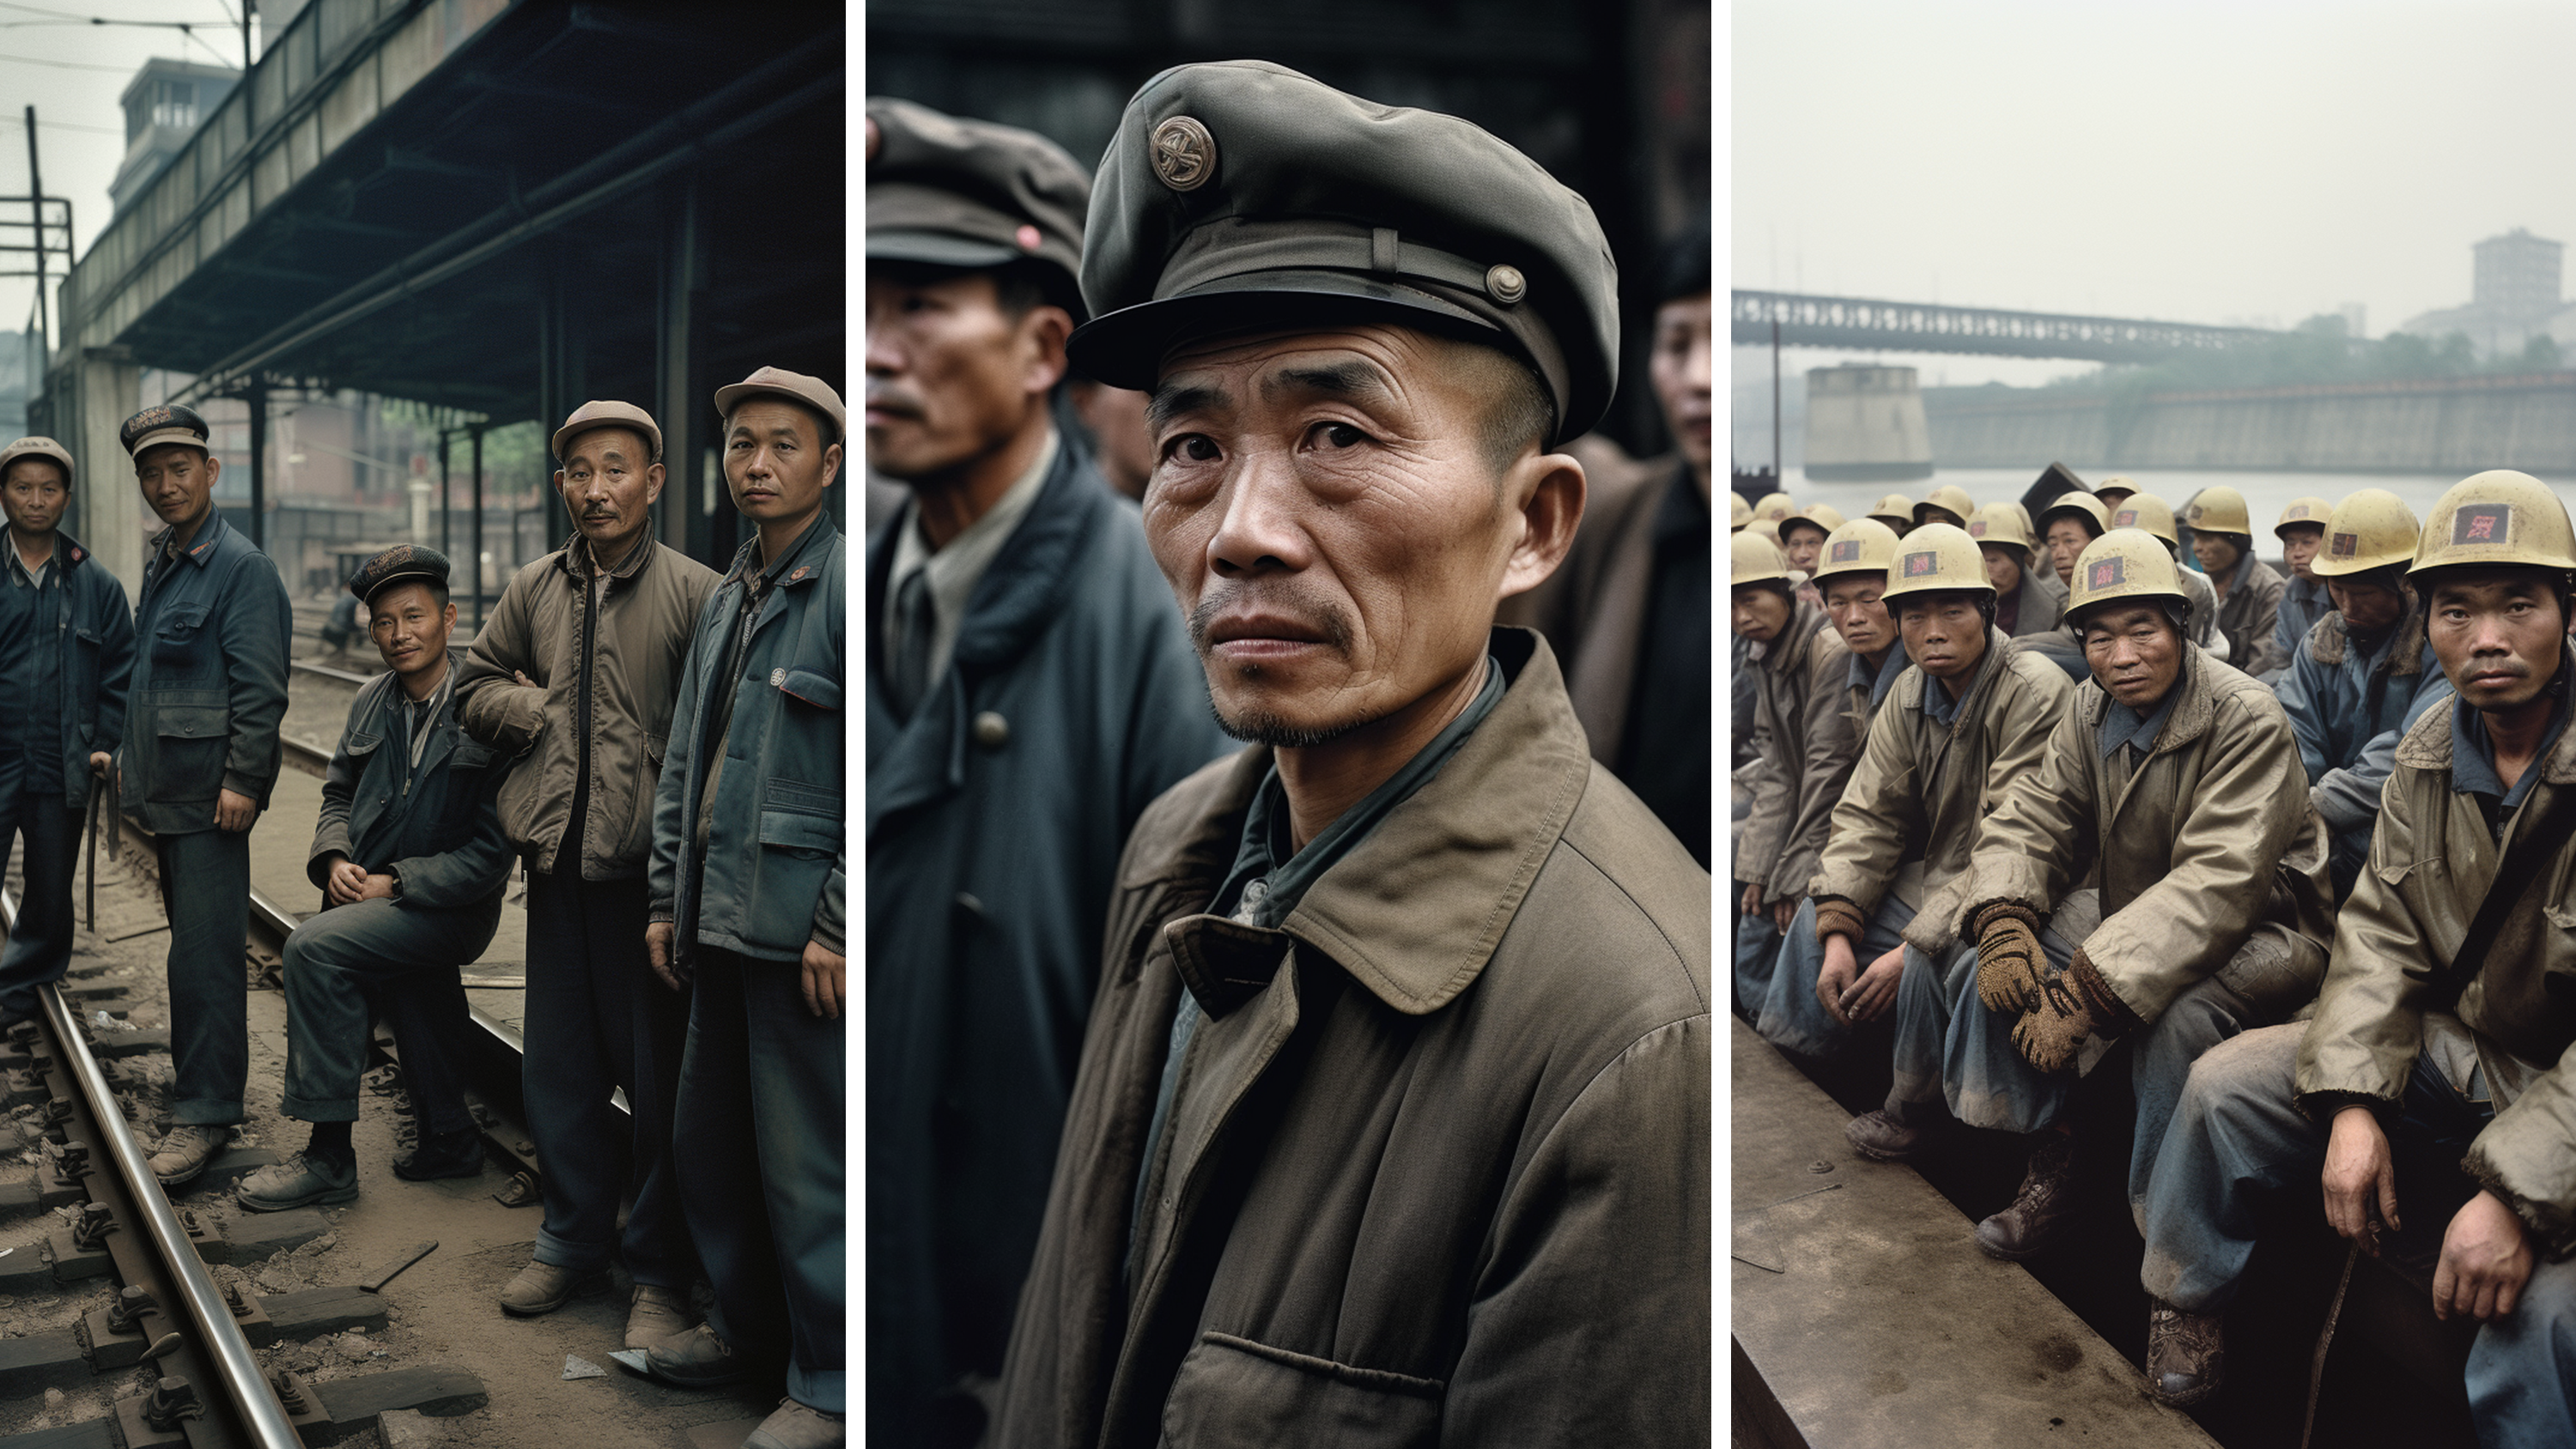 Three AI-generated images depicting workers in China in a retro photography style